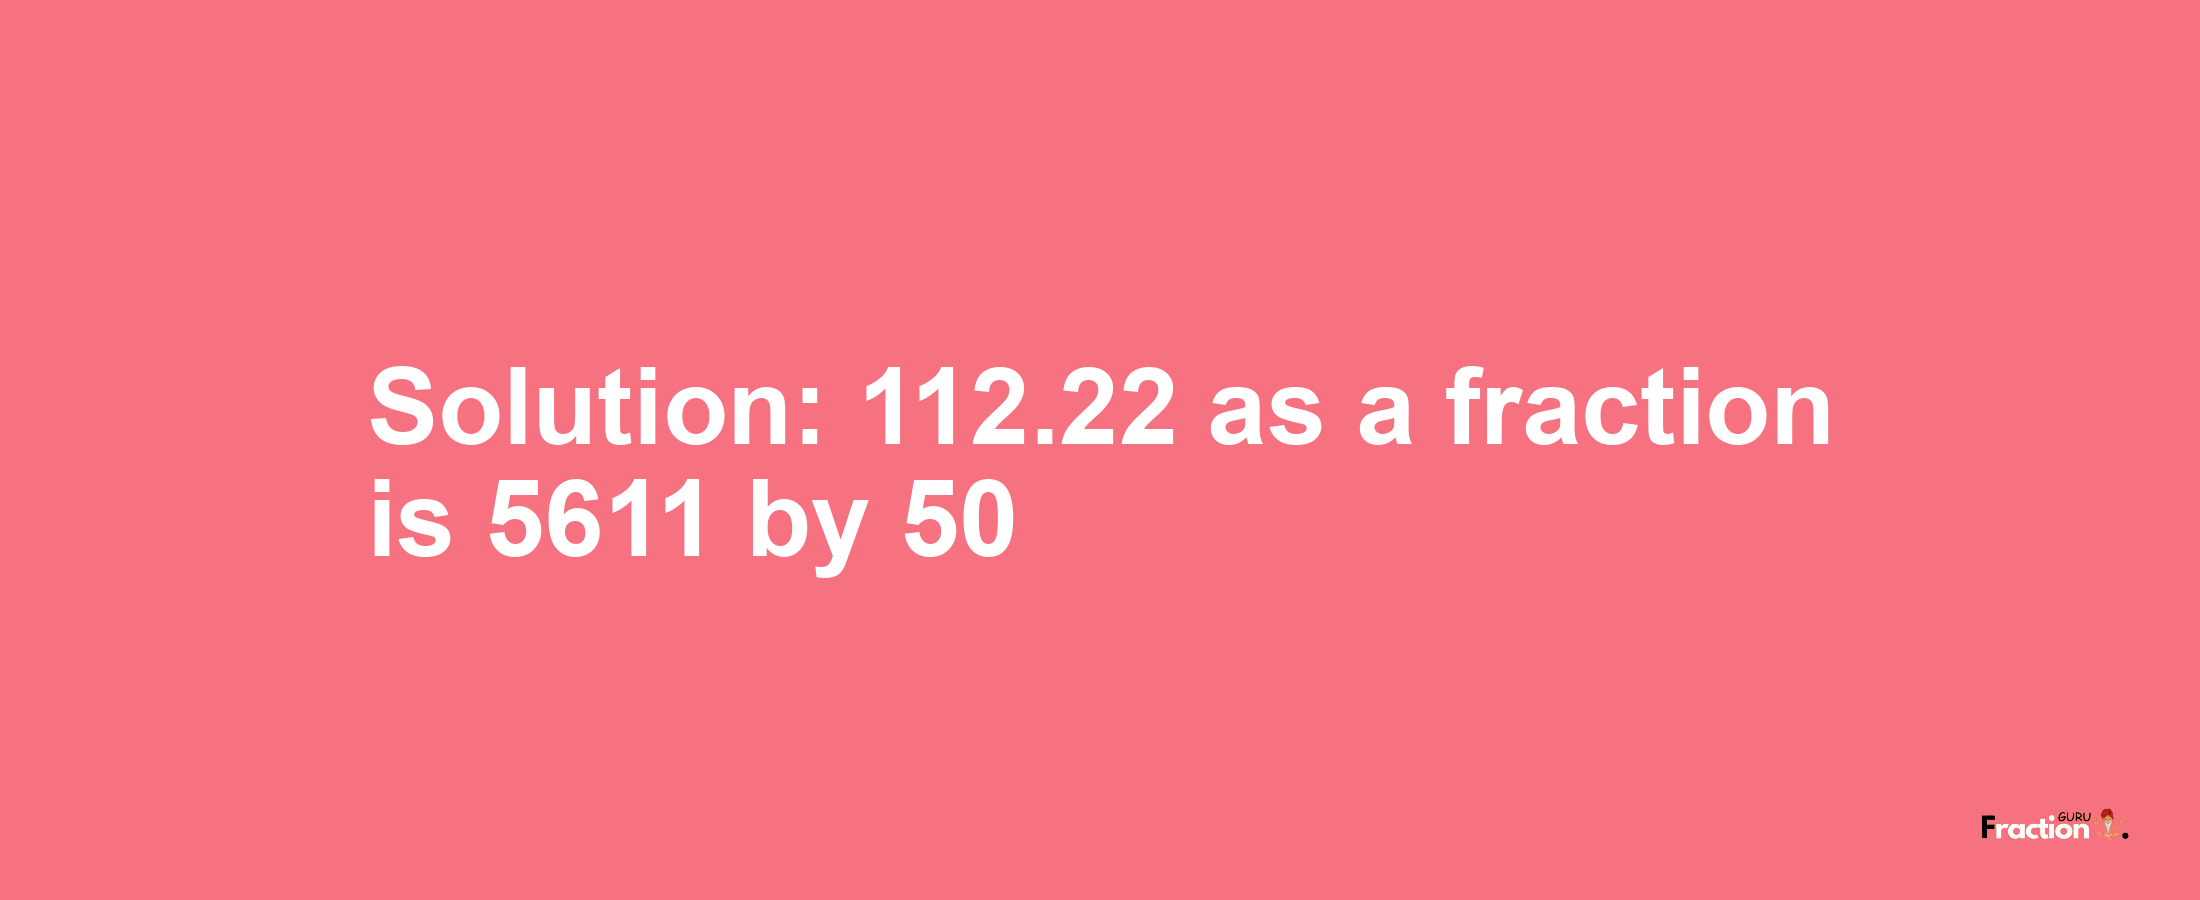 Solution:112.22 as a fraction is 5611/50